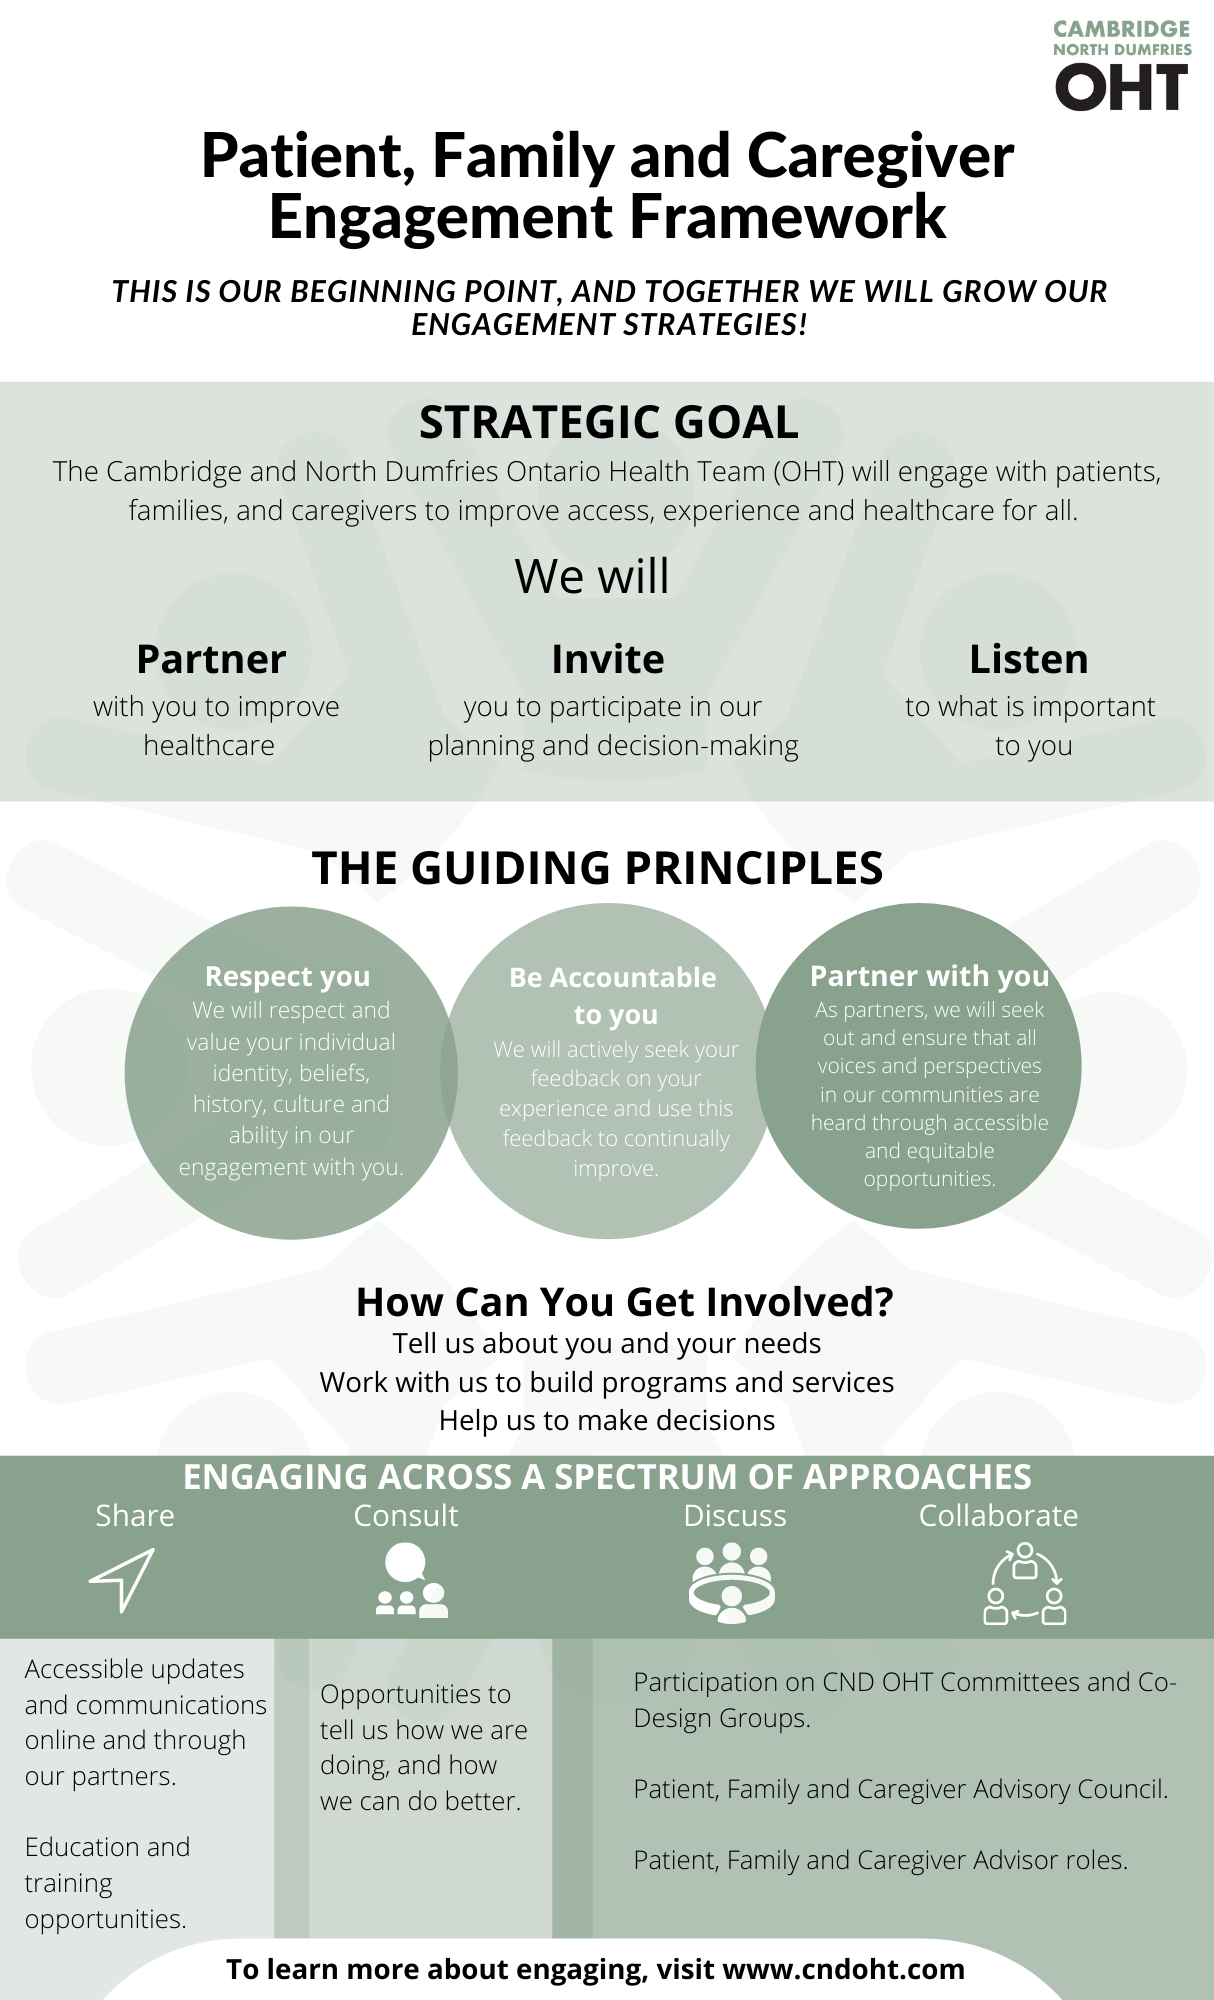 An infographic covering our Patient, Family and Caregiver Engagement Framework